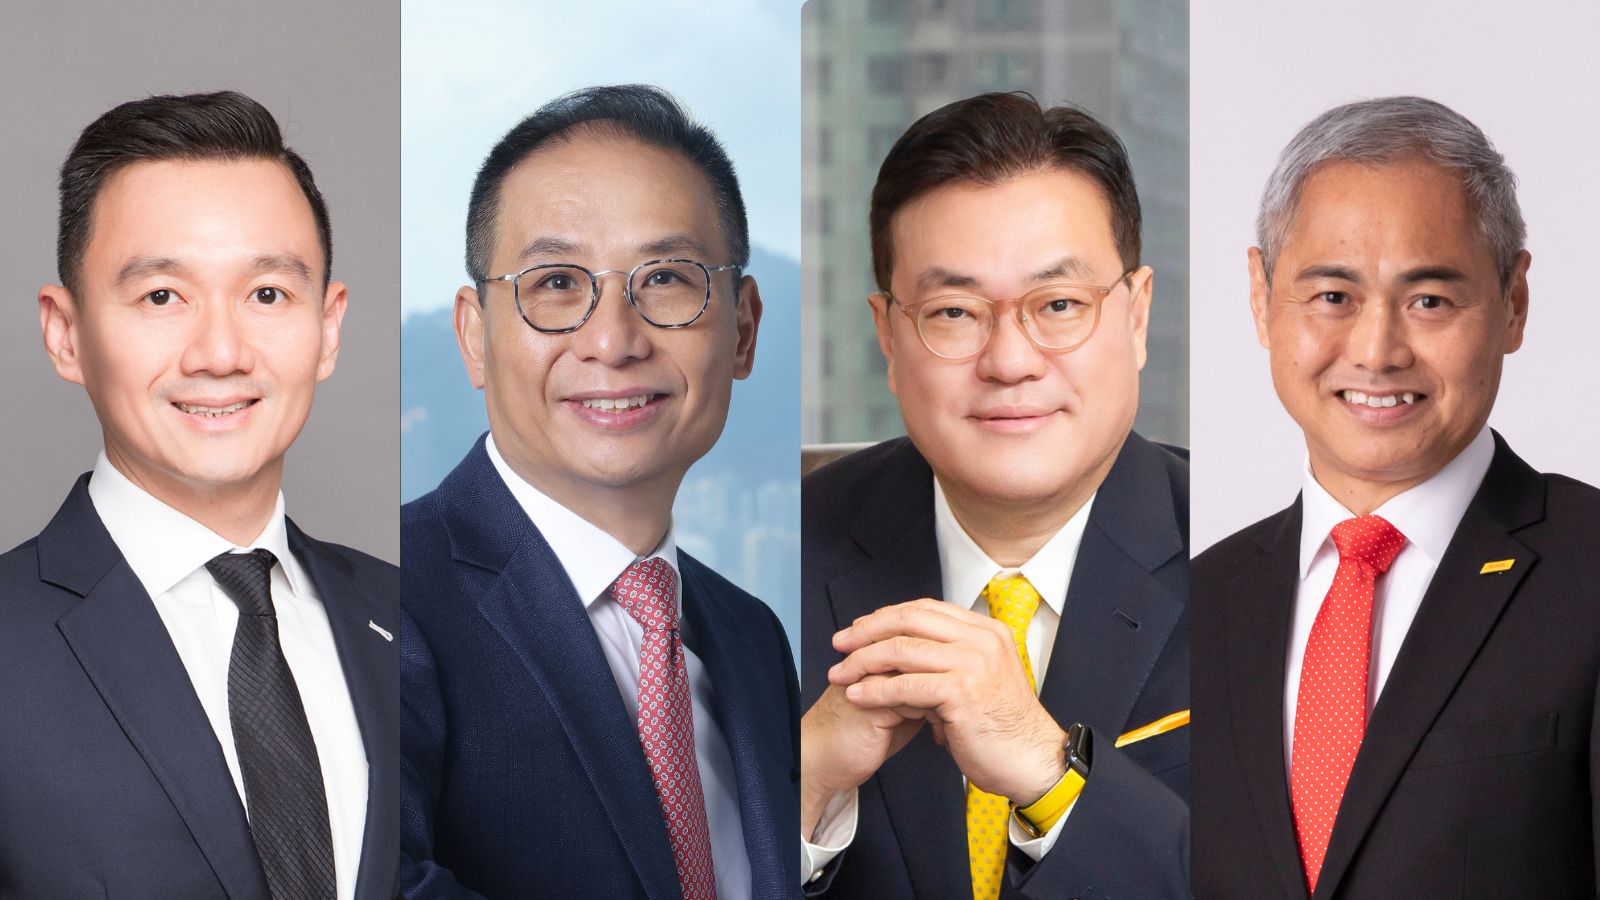 DHL Express makes changes to Asia Pacific management board (From left to right: Yung C. Ooi as Asia Pacific’s Senior Vice President for Commercial; Andy Chiang as Managing Director for DHL Express Hong Kong & Macau; Ji Hun (Michael) Han as Managing Director for DHL Express Korea; Chee Choong Ng as Managing Director for DHL Express Taiwan)